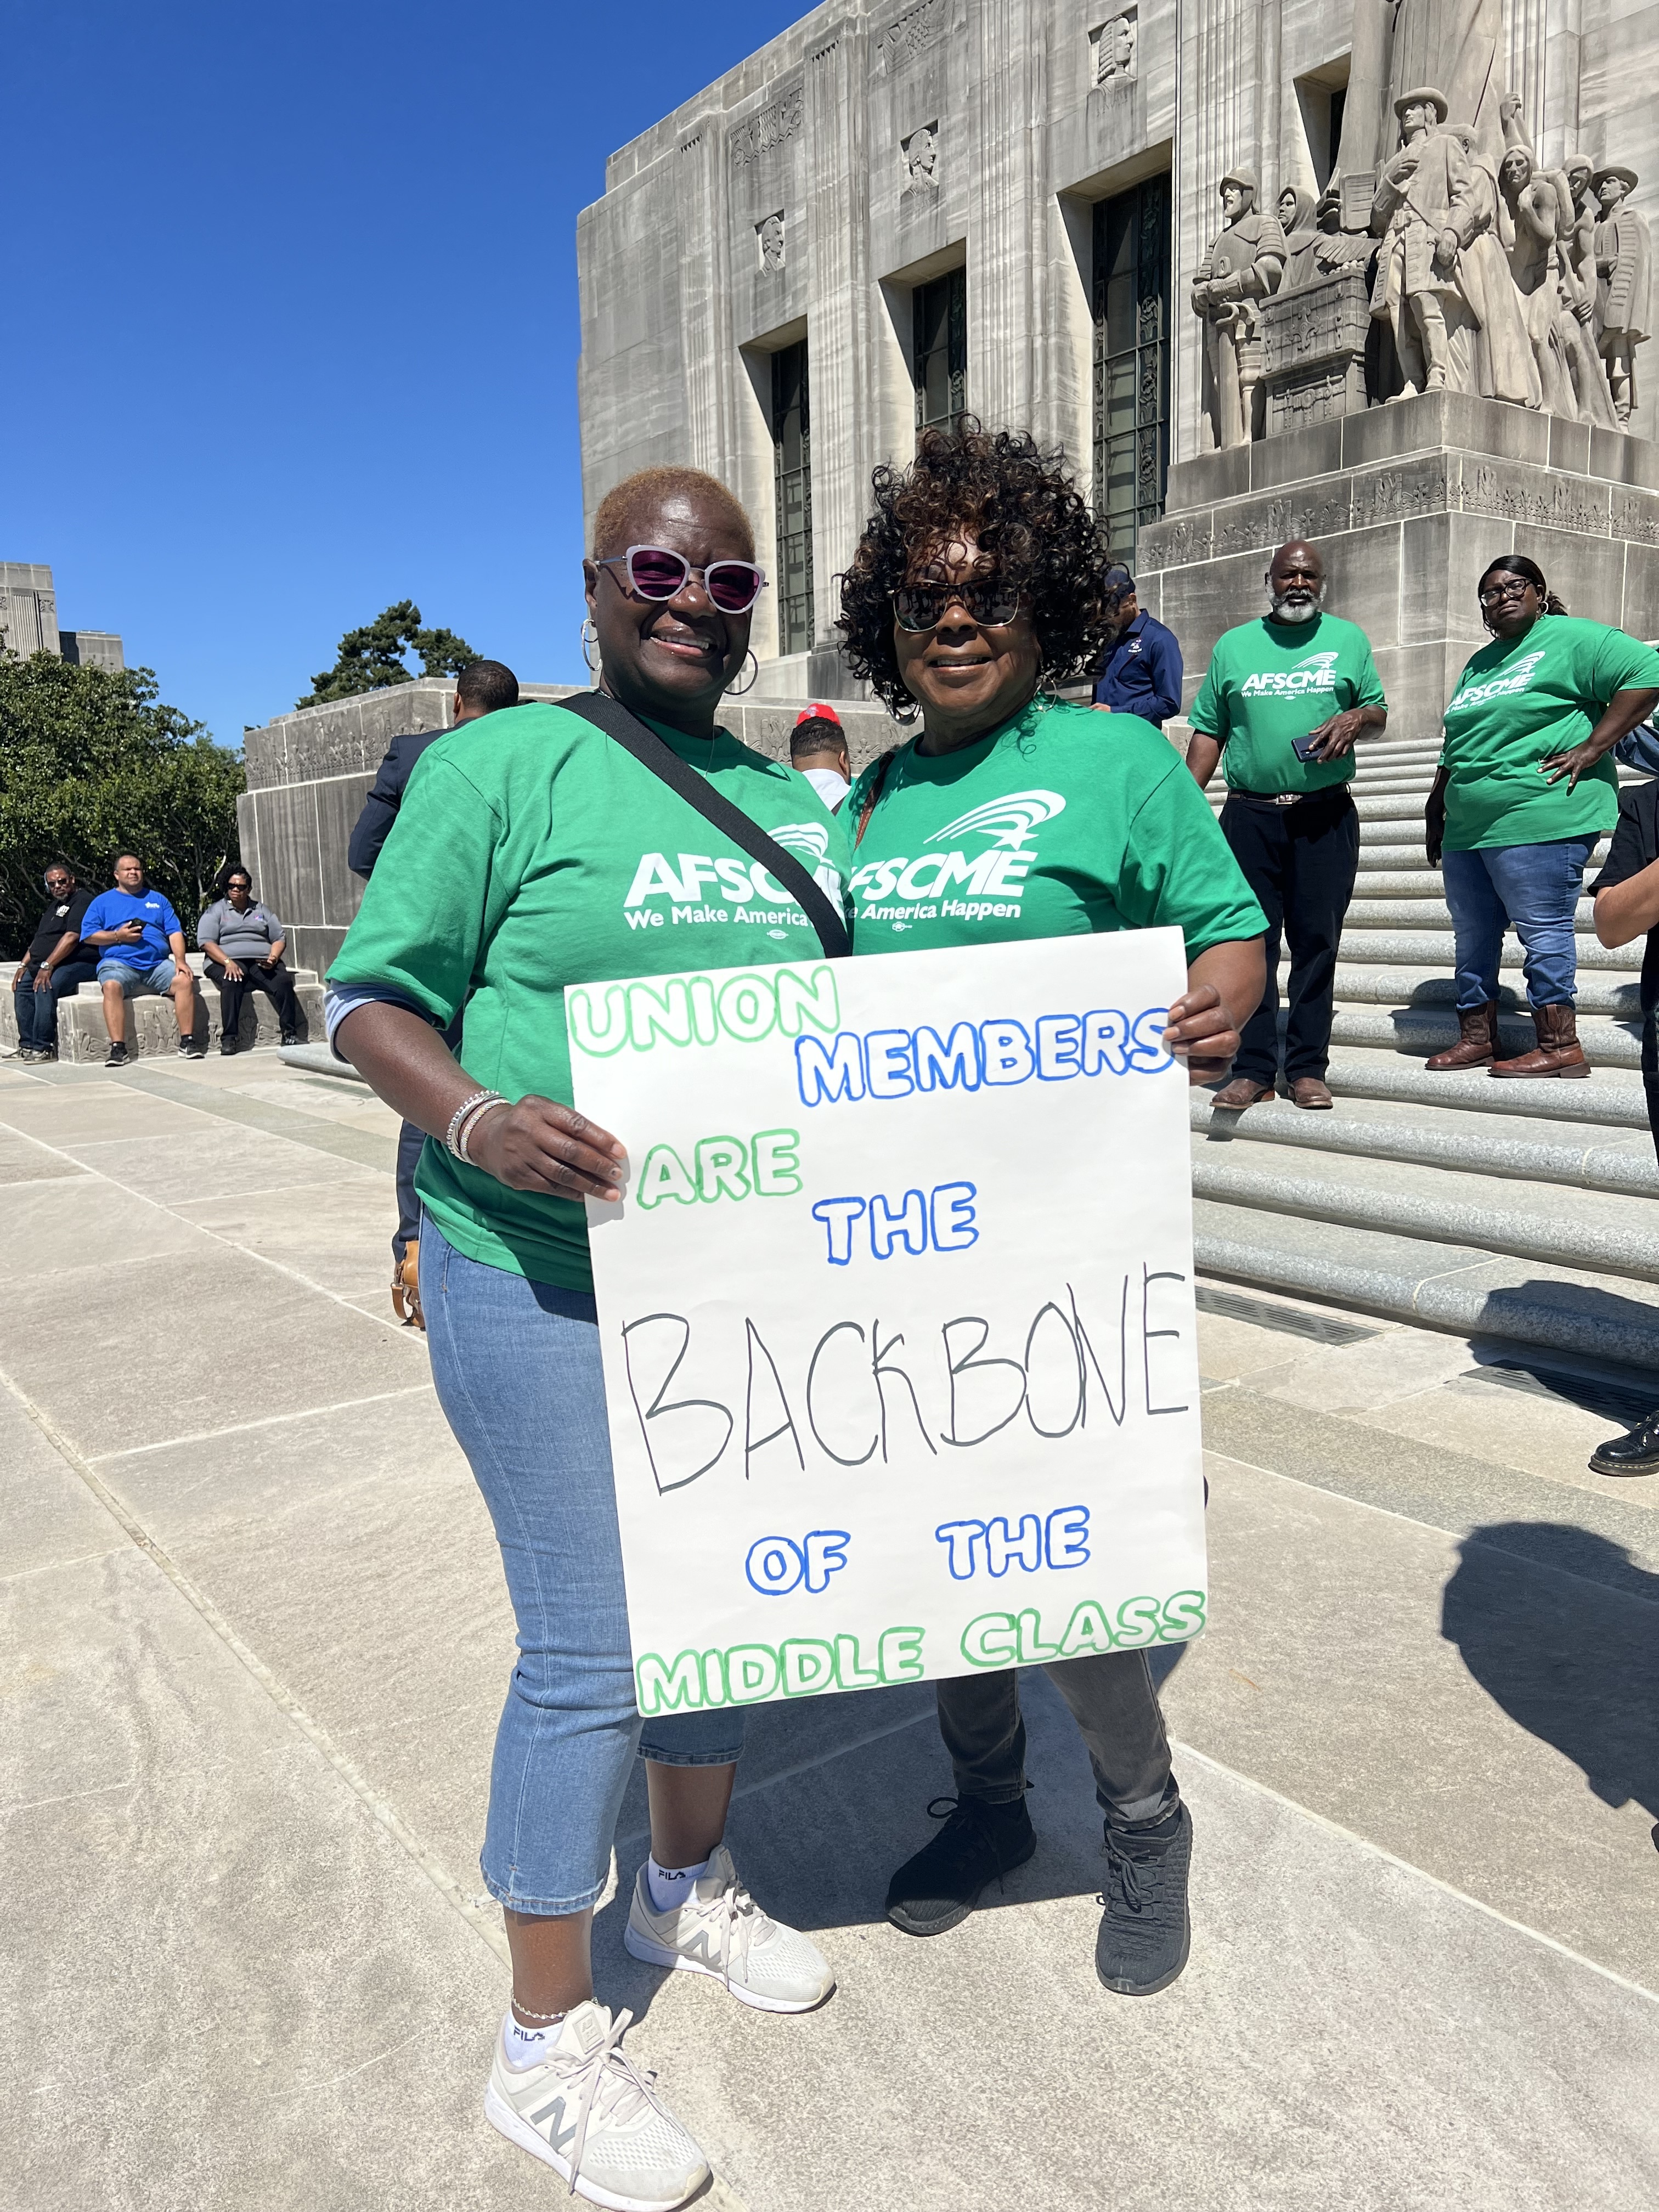 Louisiana AFSCME members defeat anti-worker bills by standing together